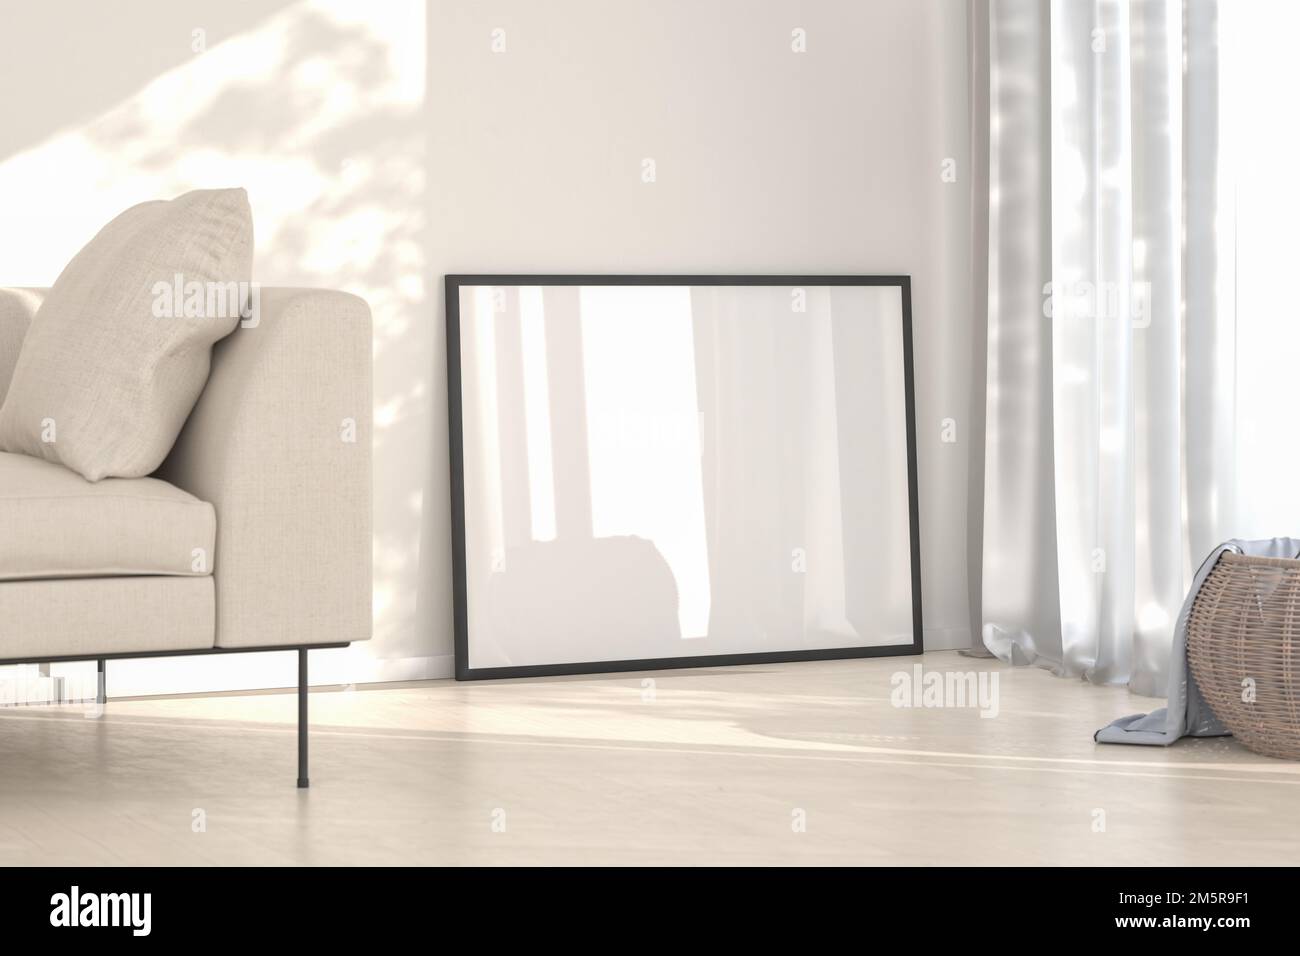 Interior mockup - Living room with sofa and wicker basket. One blank picture frame leaning to the wall. Stock Photo